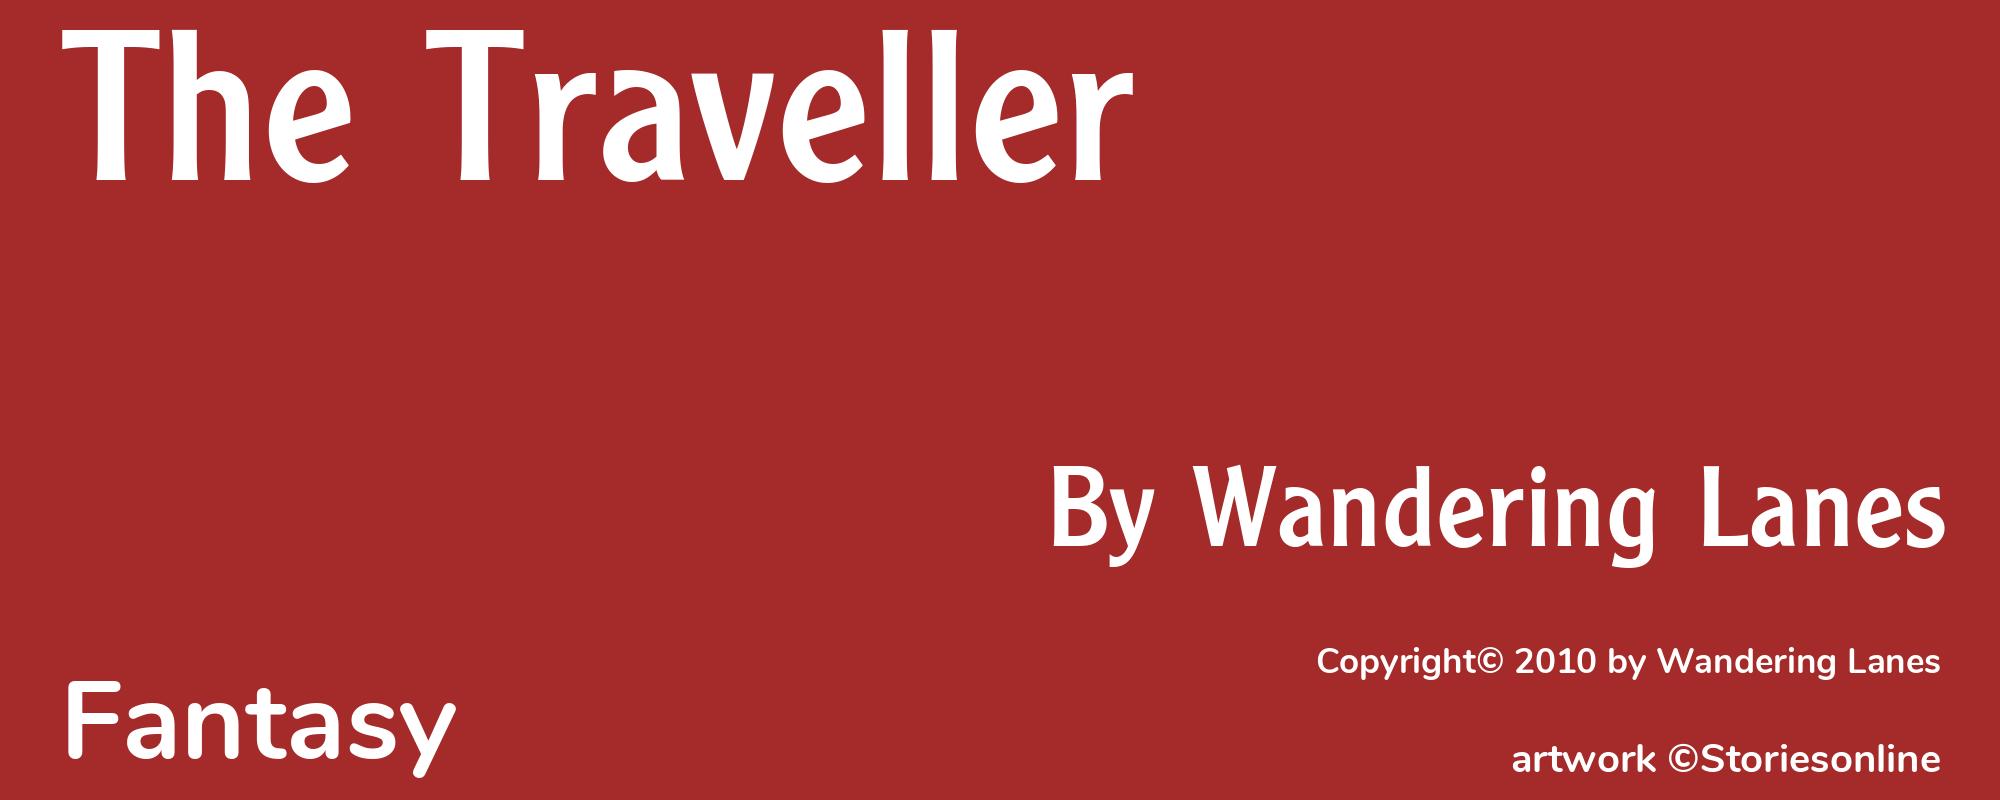 The Traveller - Cover